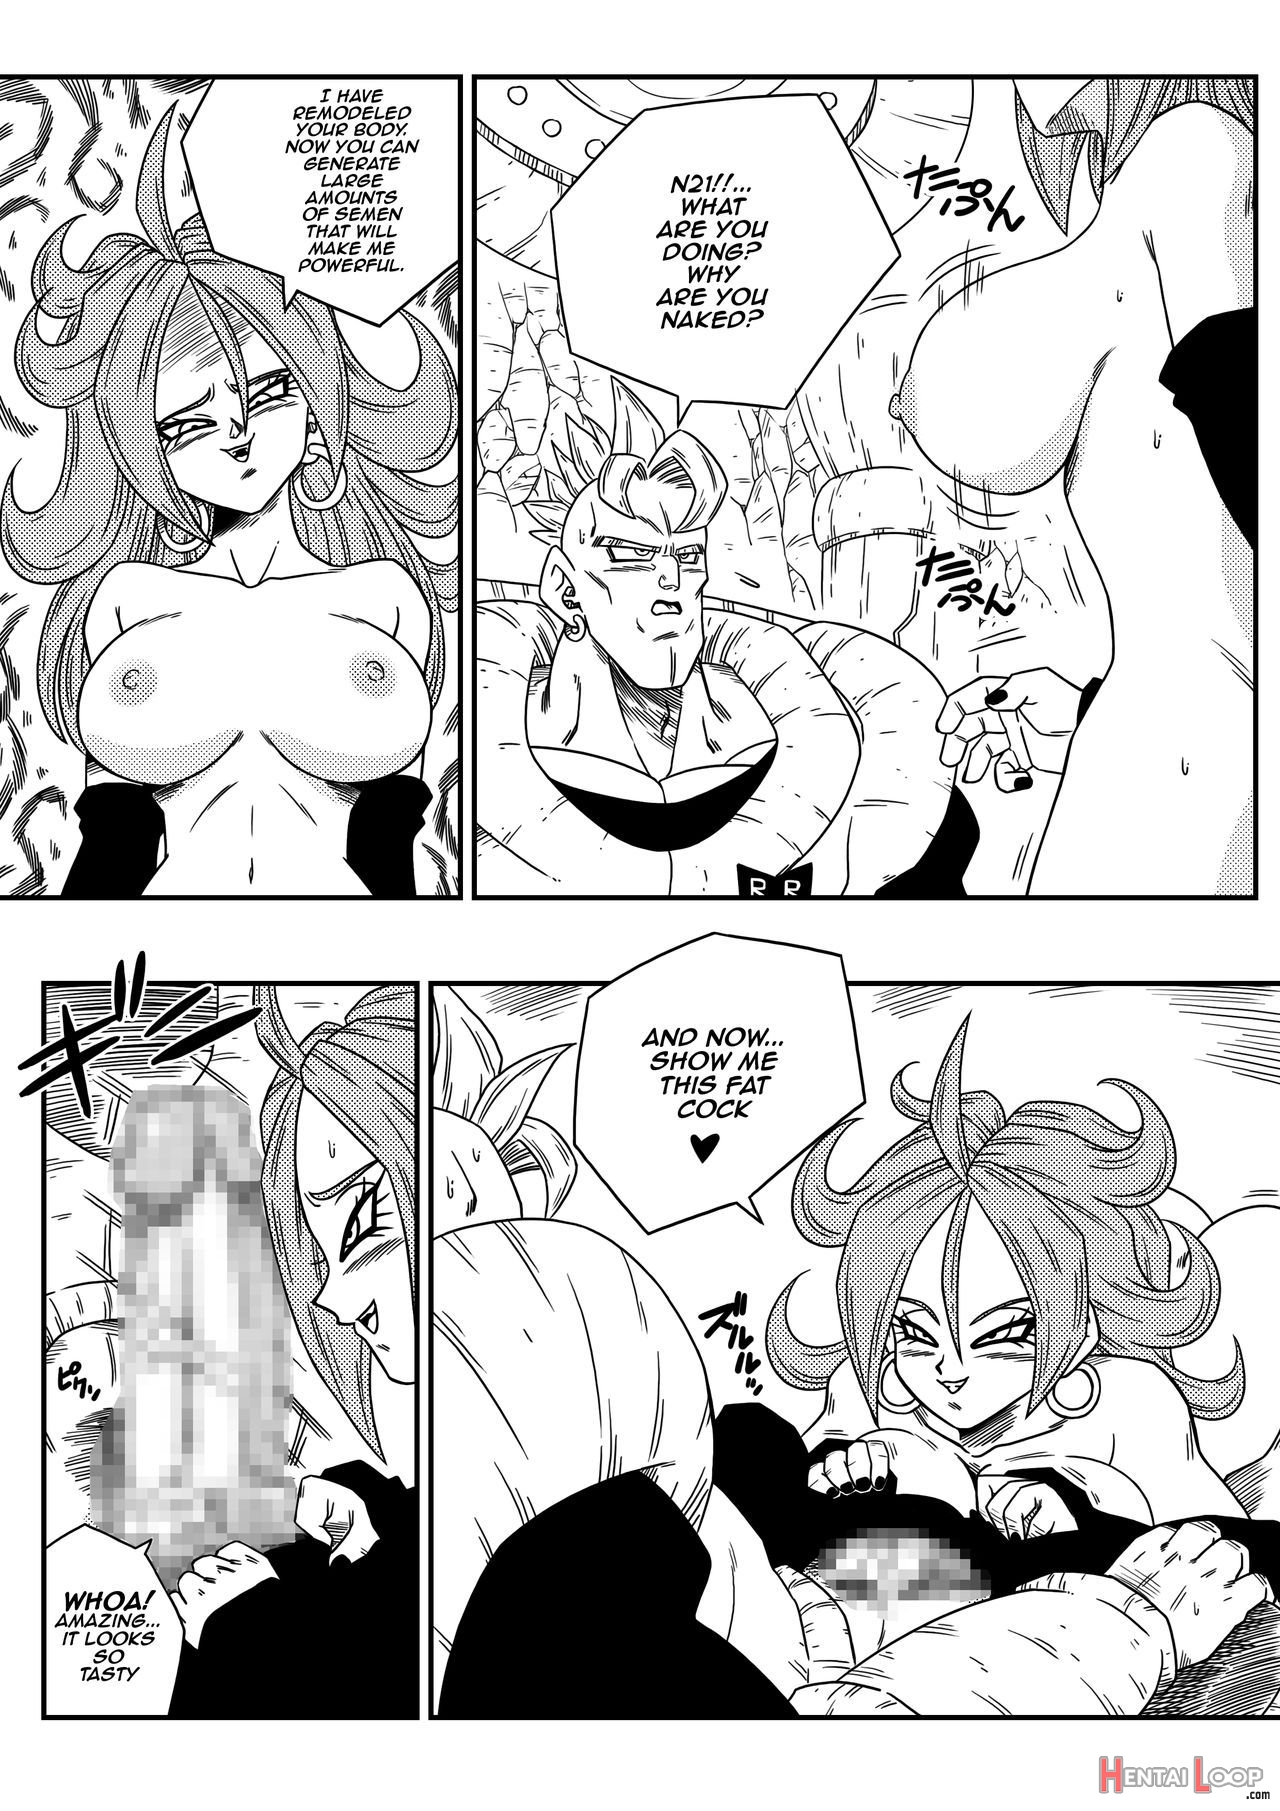 Busty Android Wants To Dominate The World! page 6